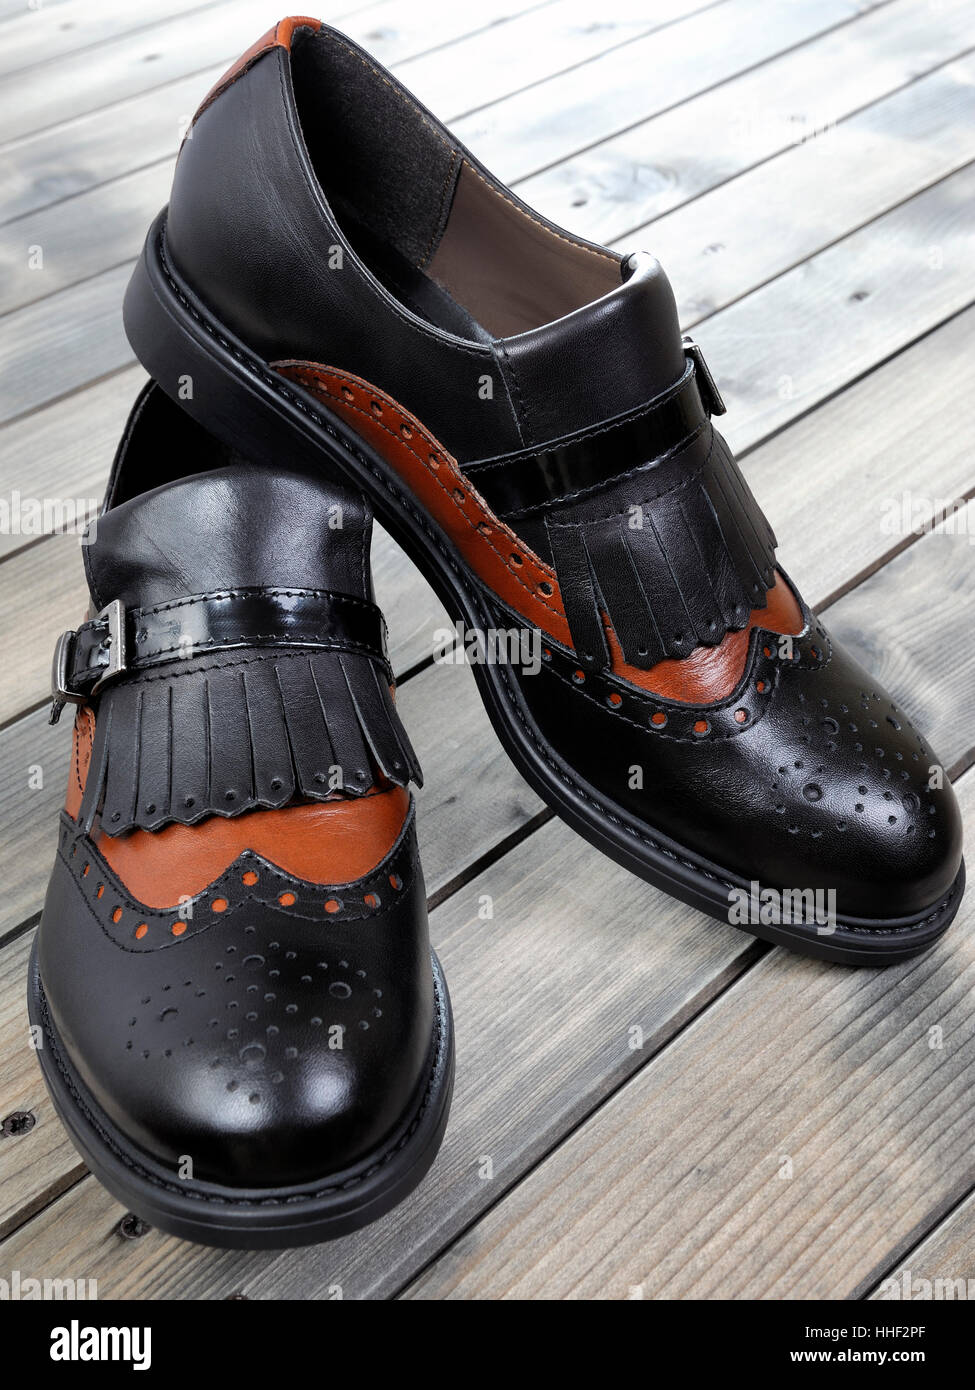 shoes with low heels leather black 